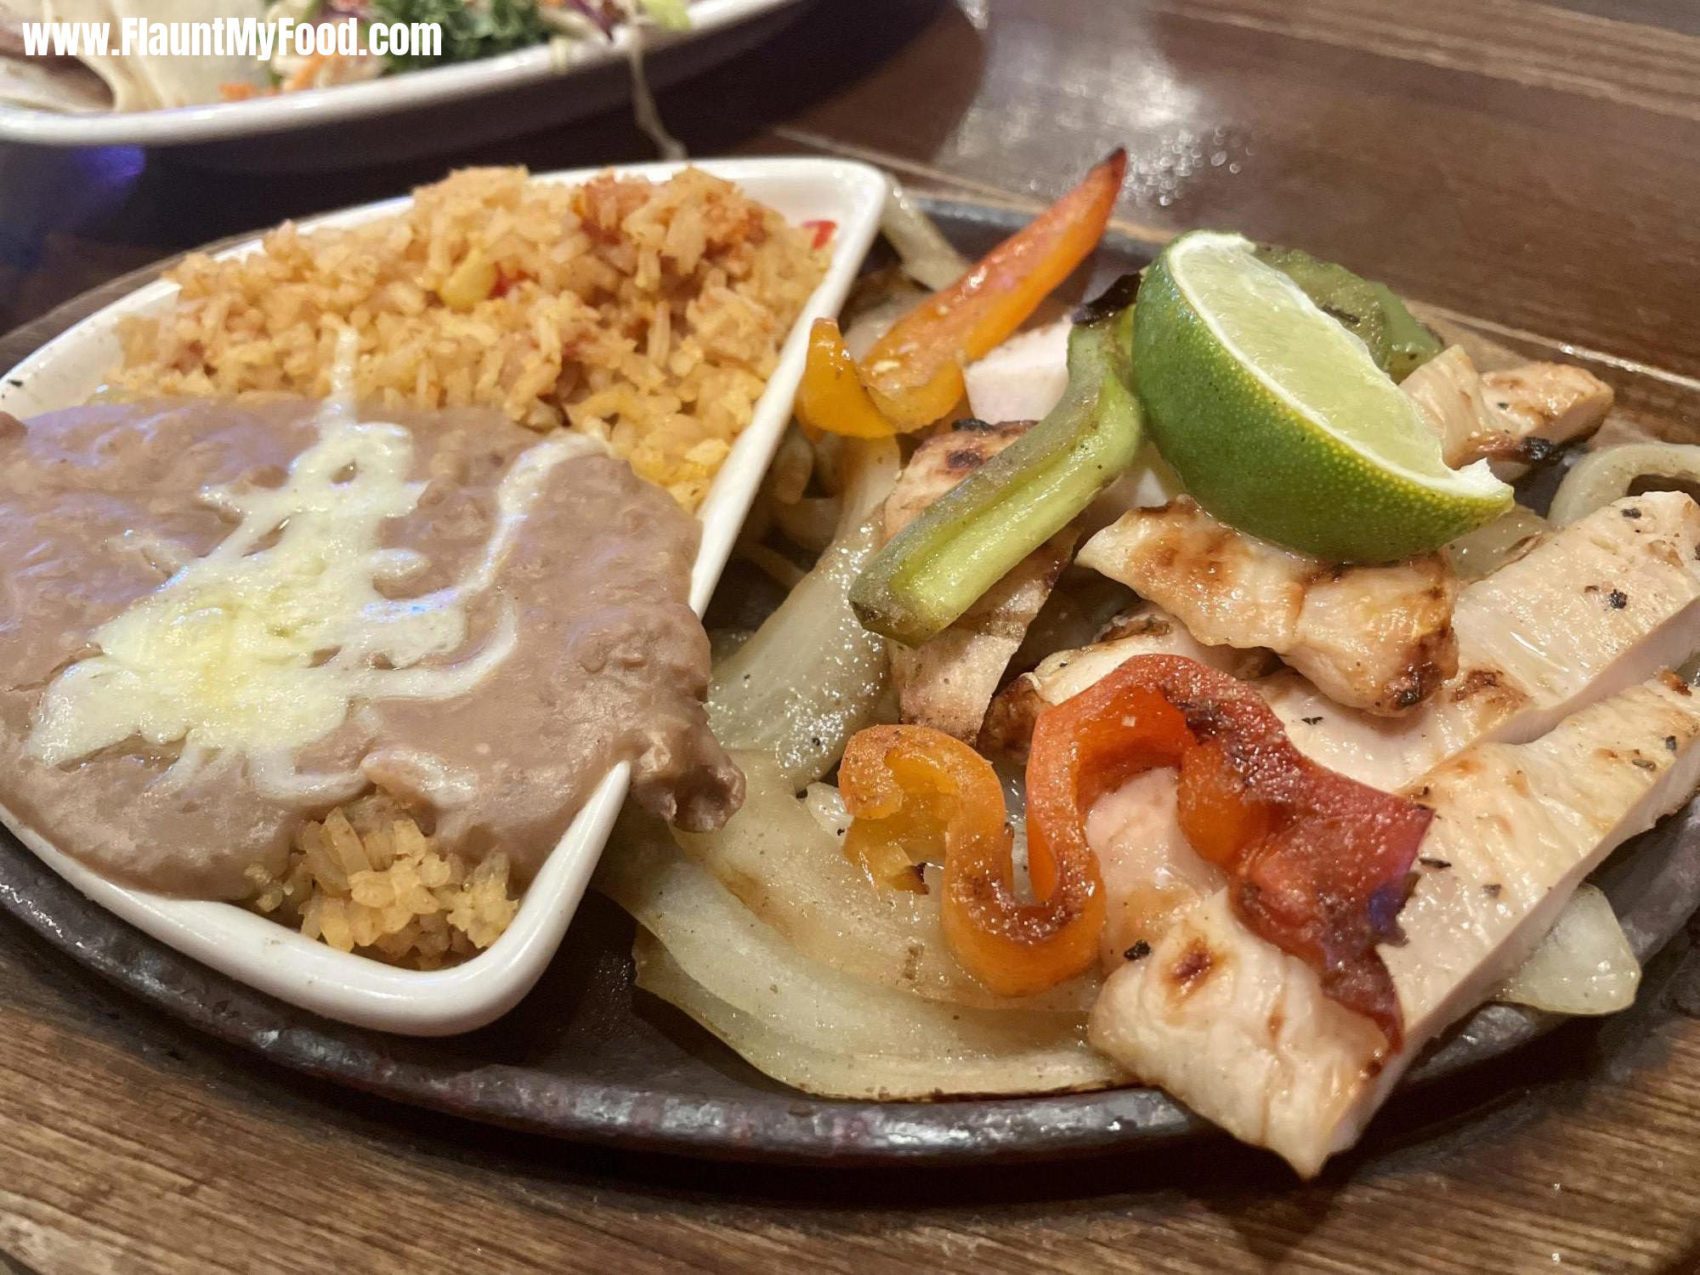 Mexican Inn on Hulen Street Fort Worth TexasChicken fajitas with beans and rice and freshly cut vegetables peppers and onions located on South Hulen in Fort Worth Texas great Mexican food.